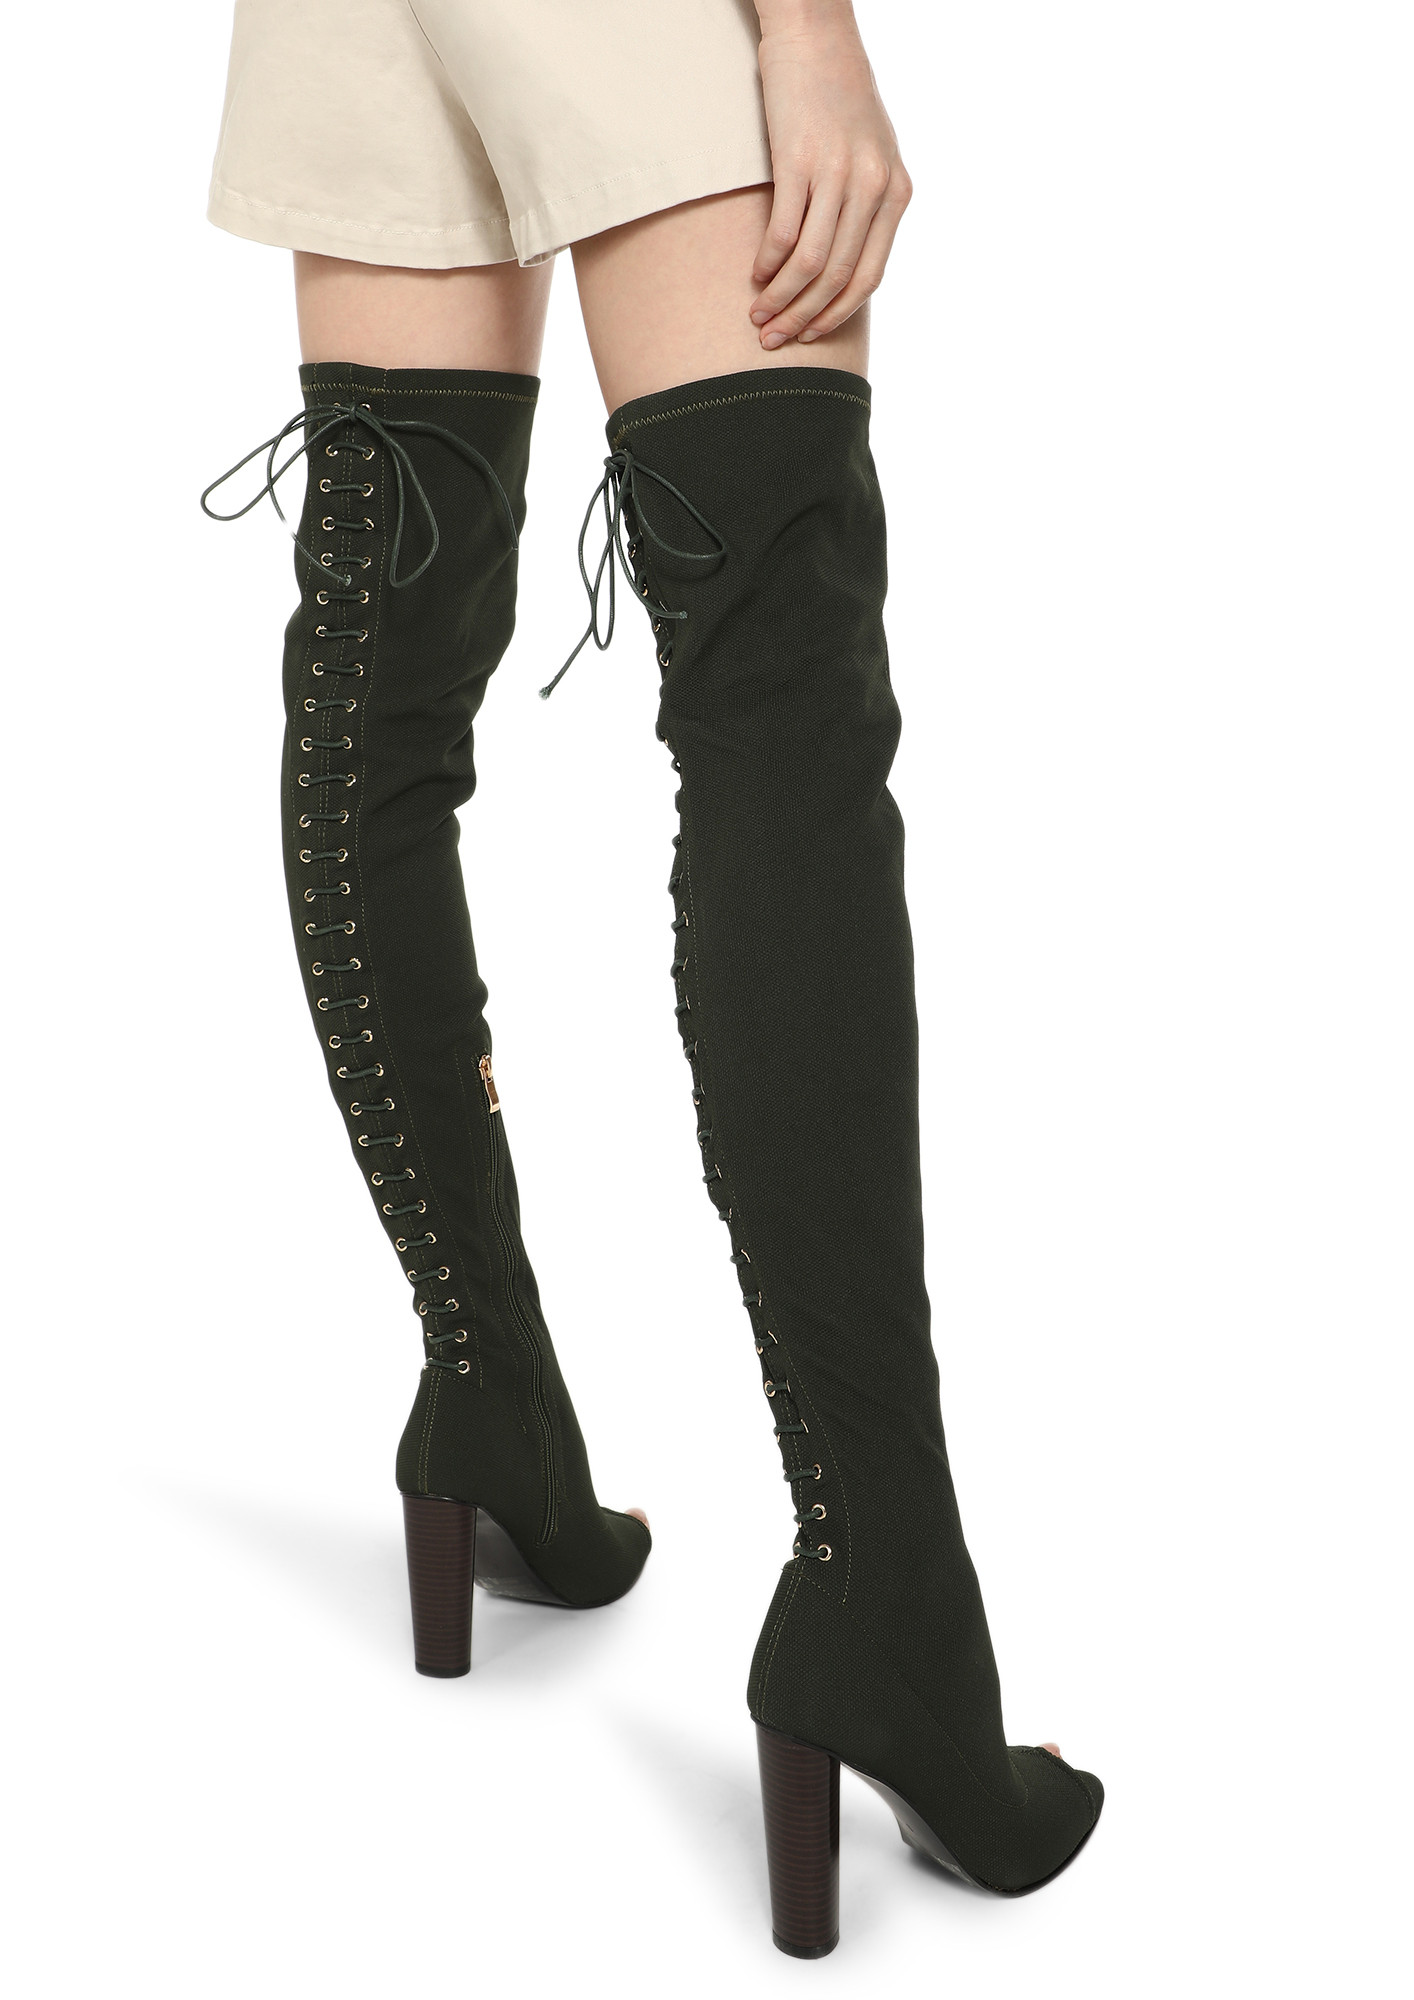 ALWAYS KEEP IT TRENDY GREEN THIGH-HIGH BOOTS